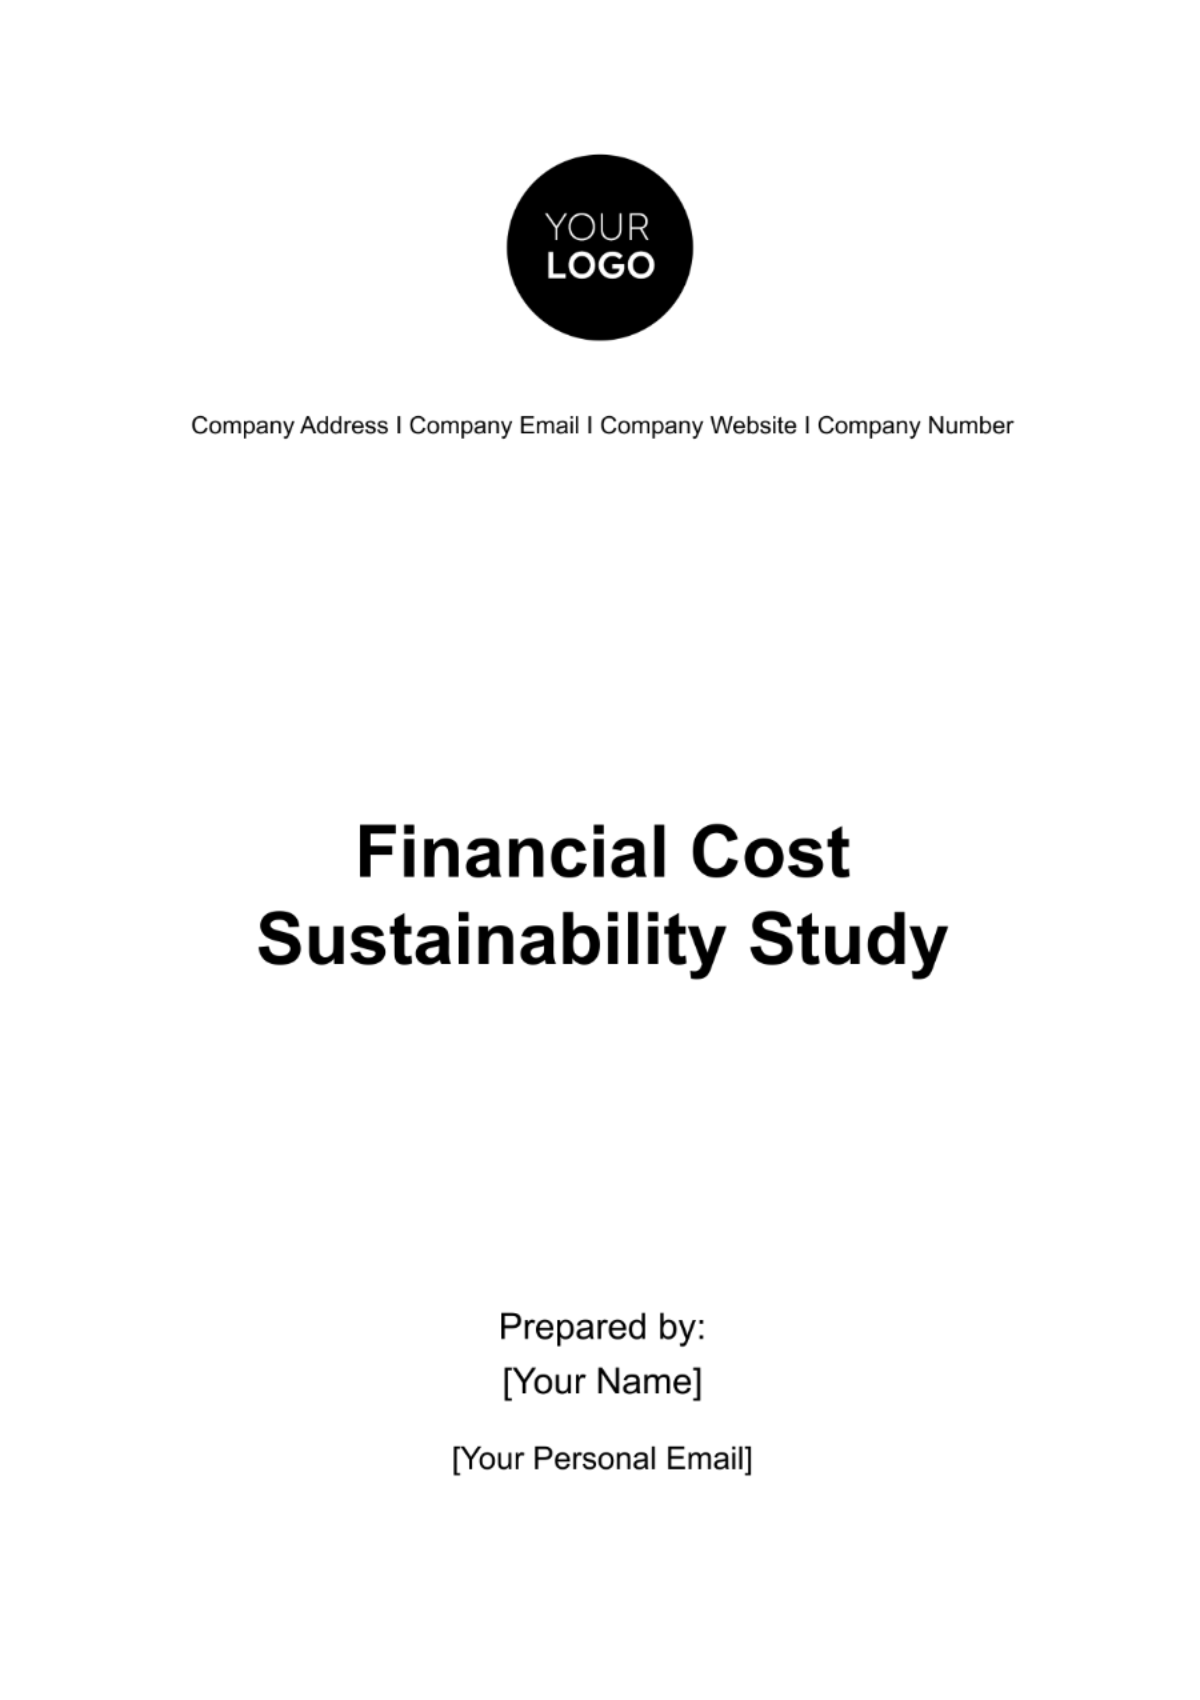 Financial Cost Sustainability Study Template